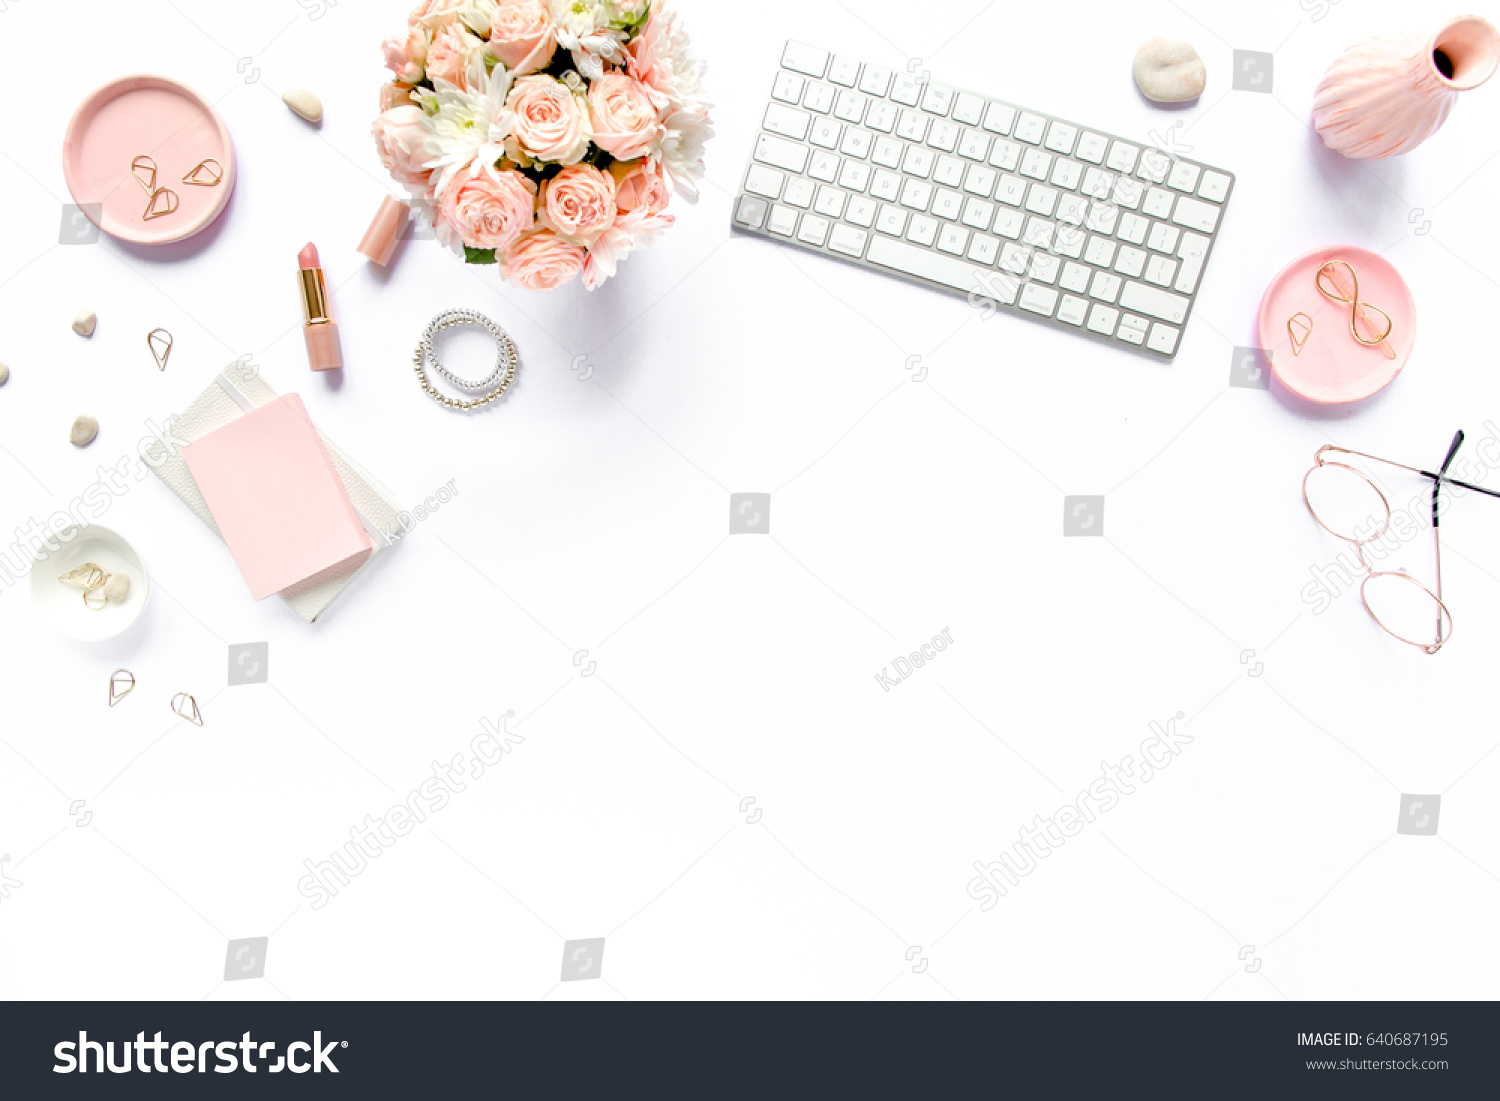 Stylized women's desk, office desk. Workspace with, laptop, bouquet roses, clipboard. Women's fashion accessories isolated on white background. Flat lay Top view #640687195